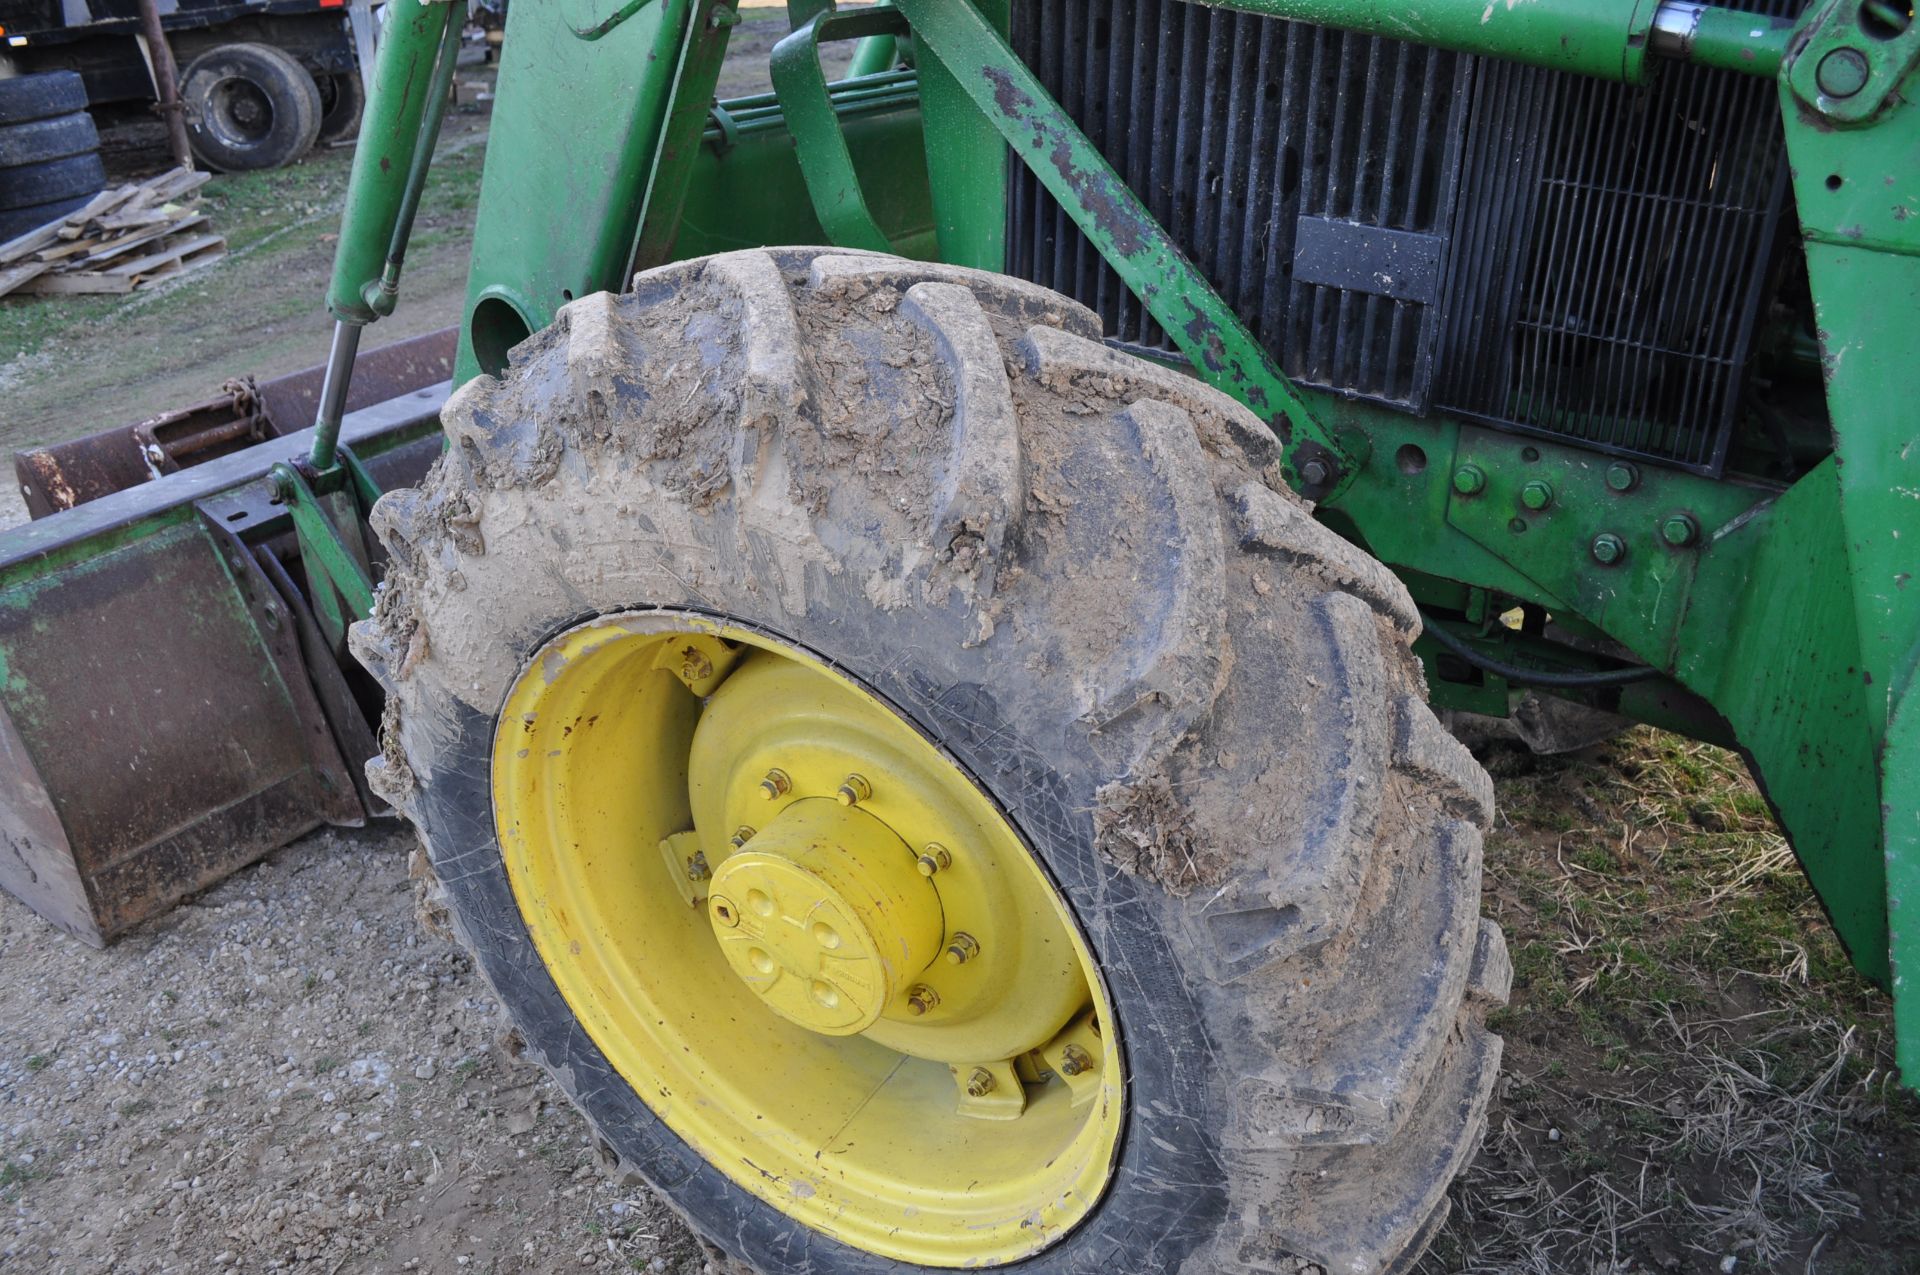 John Deere 3255 tractor, MFWD, C/H/A, 18.4-38 rear, 13.6-28 front, rear wheel weights, 2 hyd remotes - Image 5 of 28